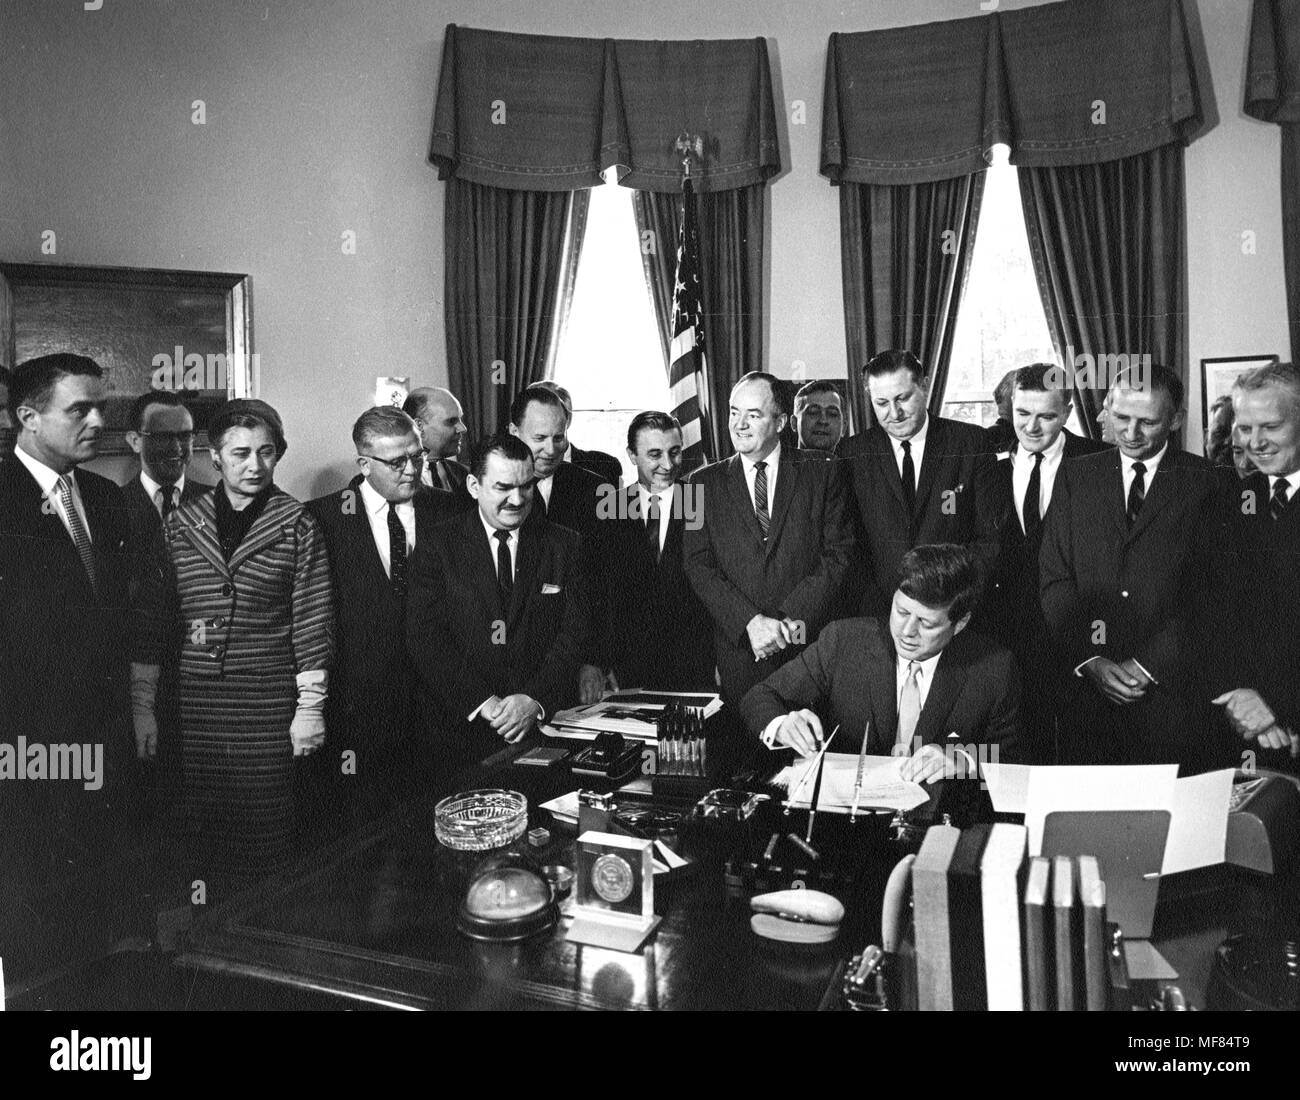 AR6801-B             22 September 1961  President John F. Kennedy signing the Peace Corps Bill in the Oval Office. Individuals identified in the photograph are John F. Kennedy, Sargent Shriver, Representative Edna Kelly, Senator Hubert Humphrey, and Senator Albert Gore  Please Credit 'Abbie Rowe, White House/John F. Kennedy Presidential Libary and Museum, Boston.' Stock Photo